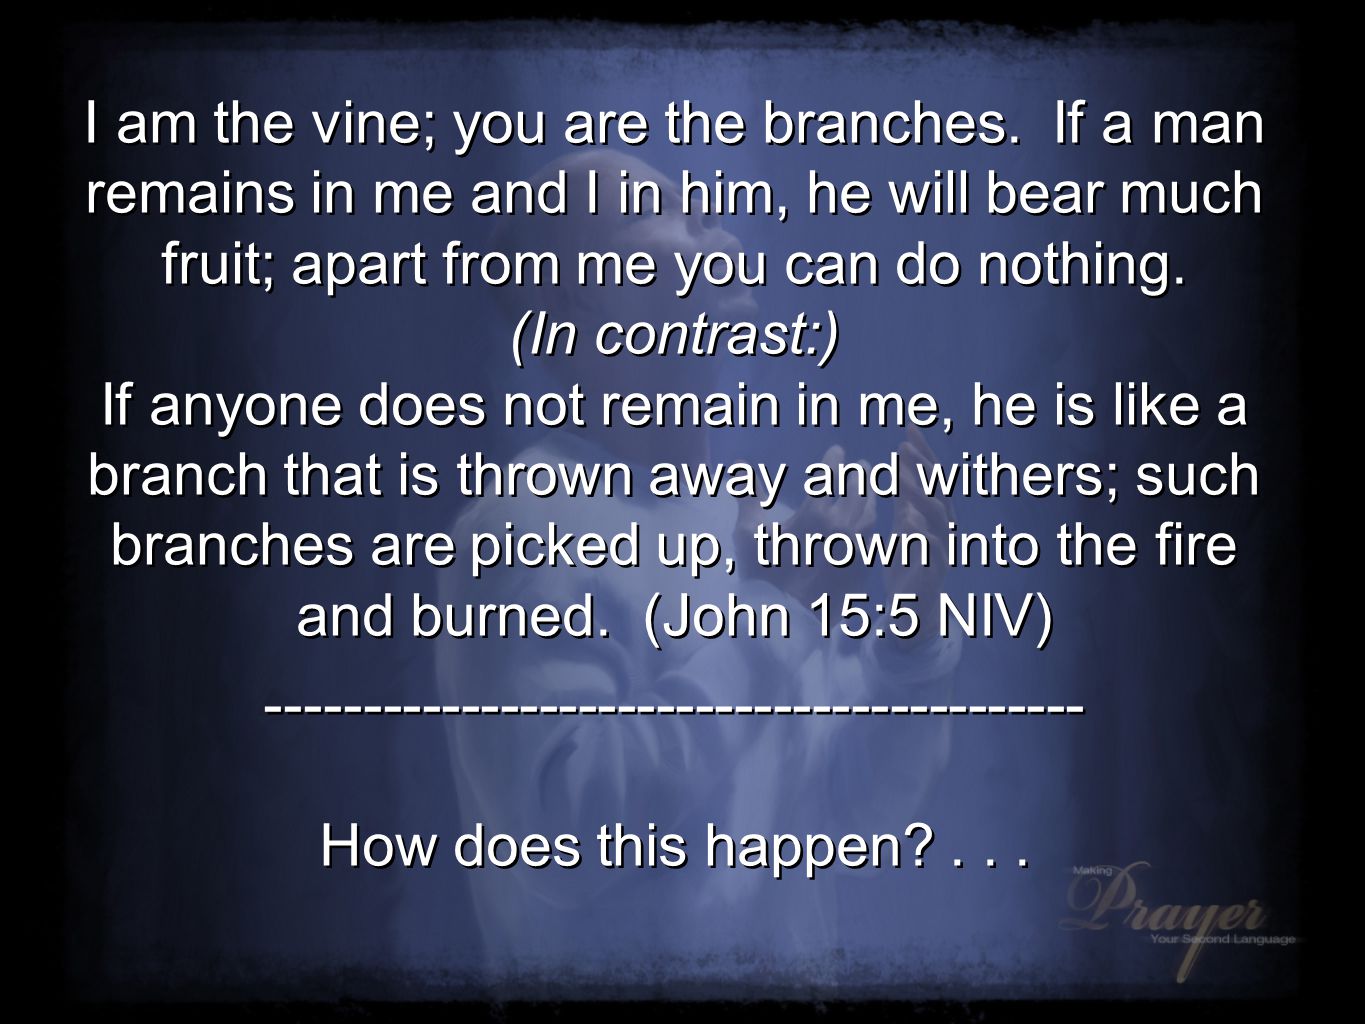 I am the vine; you are the branches.